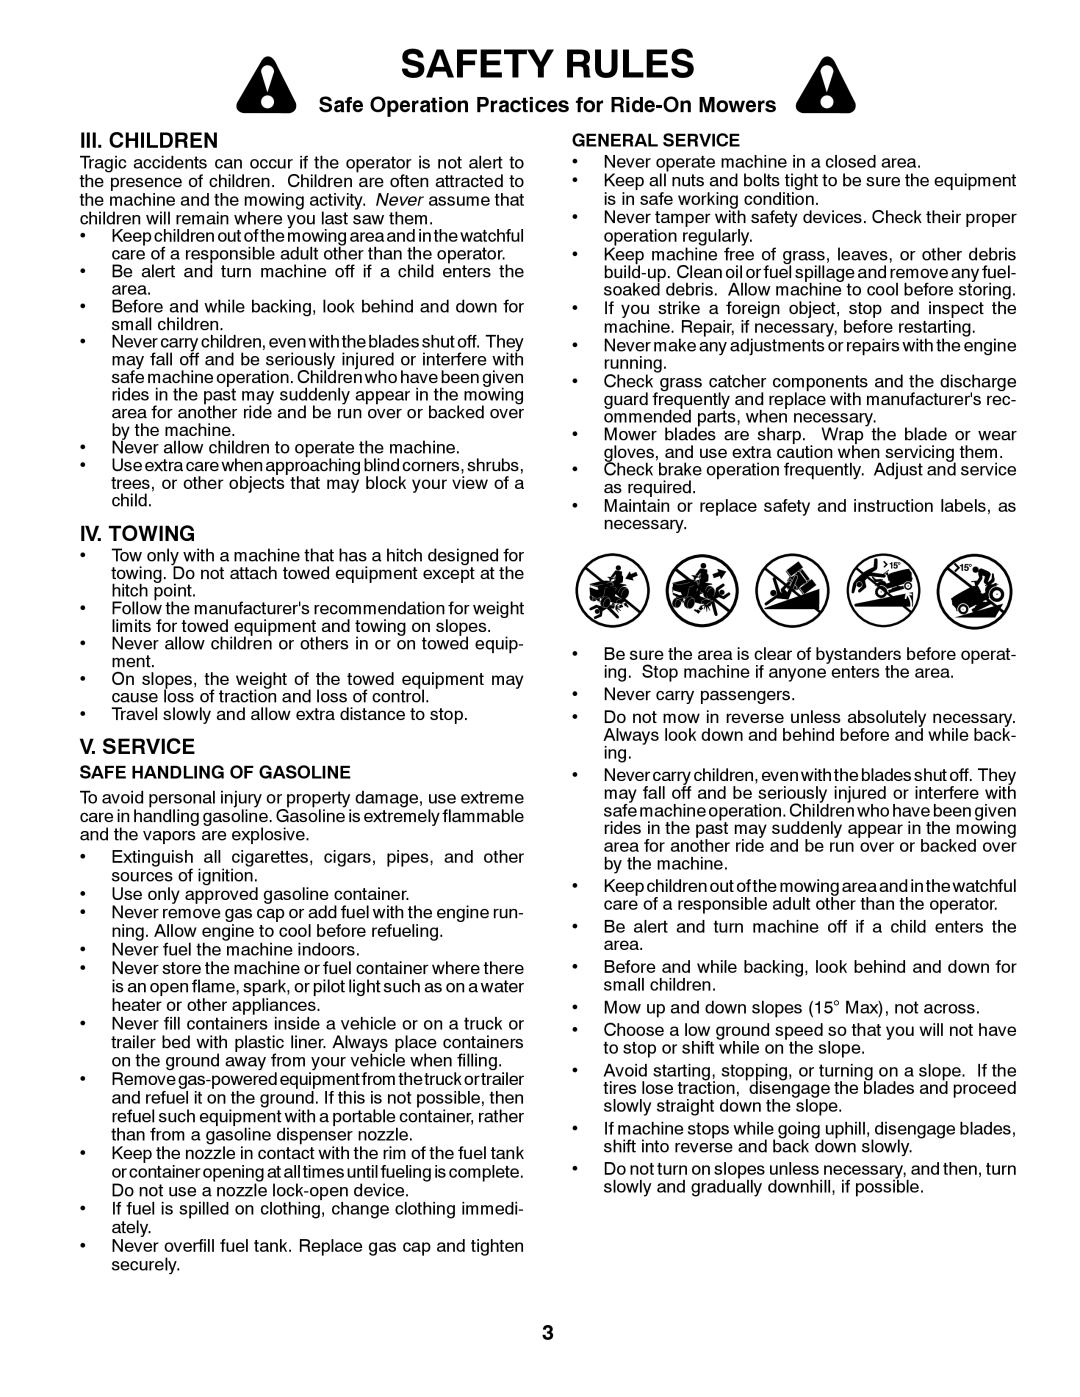 Poulan PO18542LT manual Iii. Children, Iv. Towing, V. Service, Safety Rules, Safe Operation Practices for Ride-OnMowers 